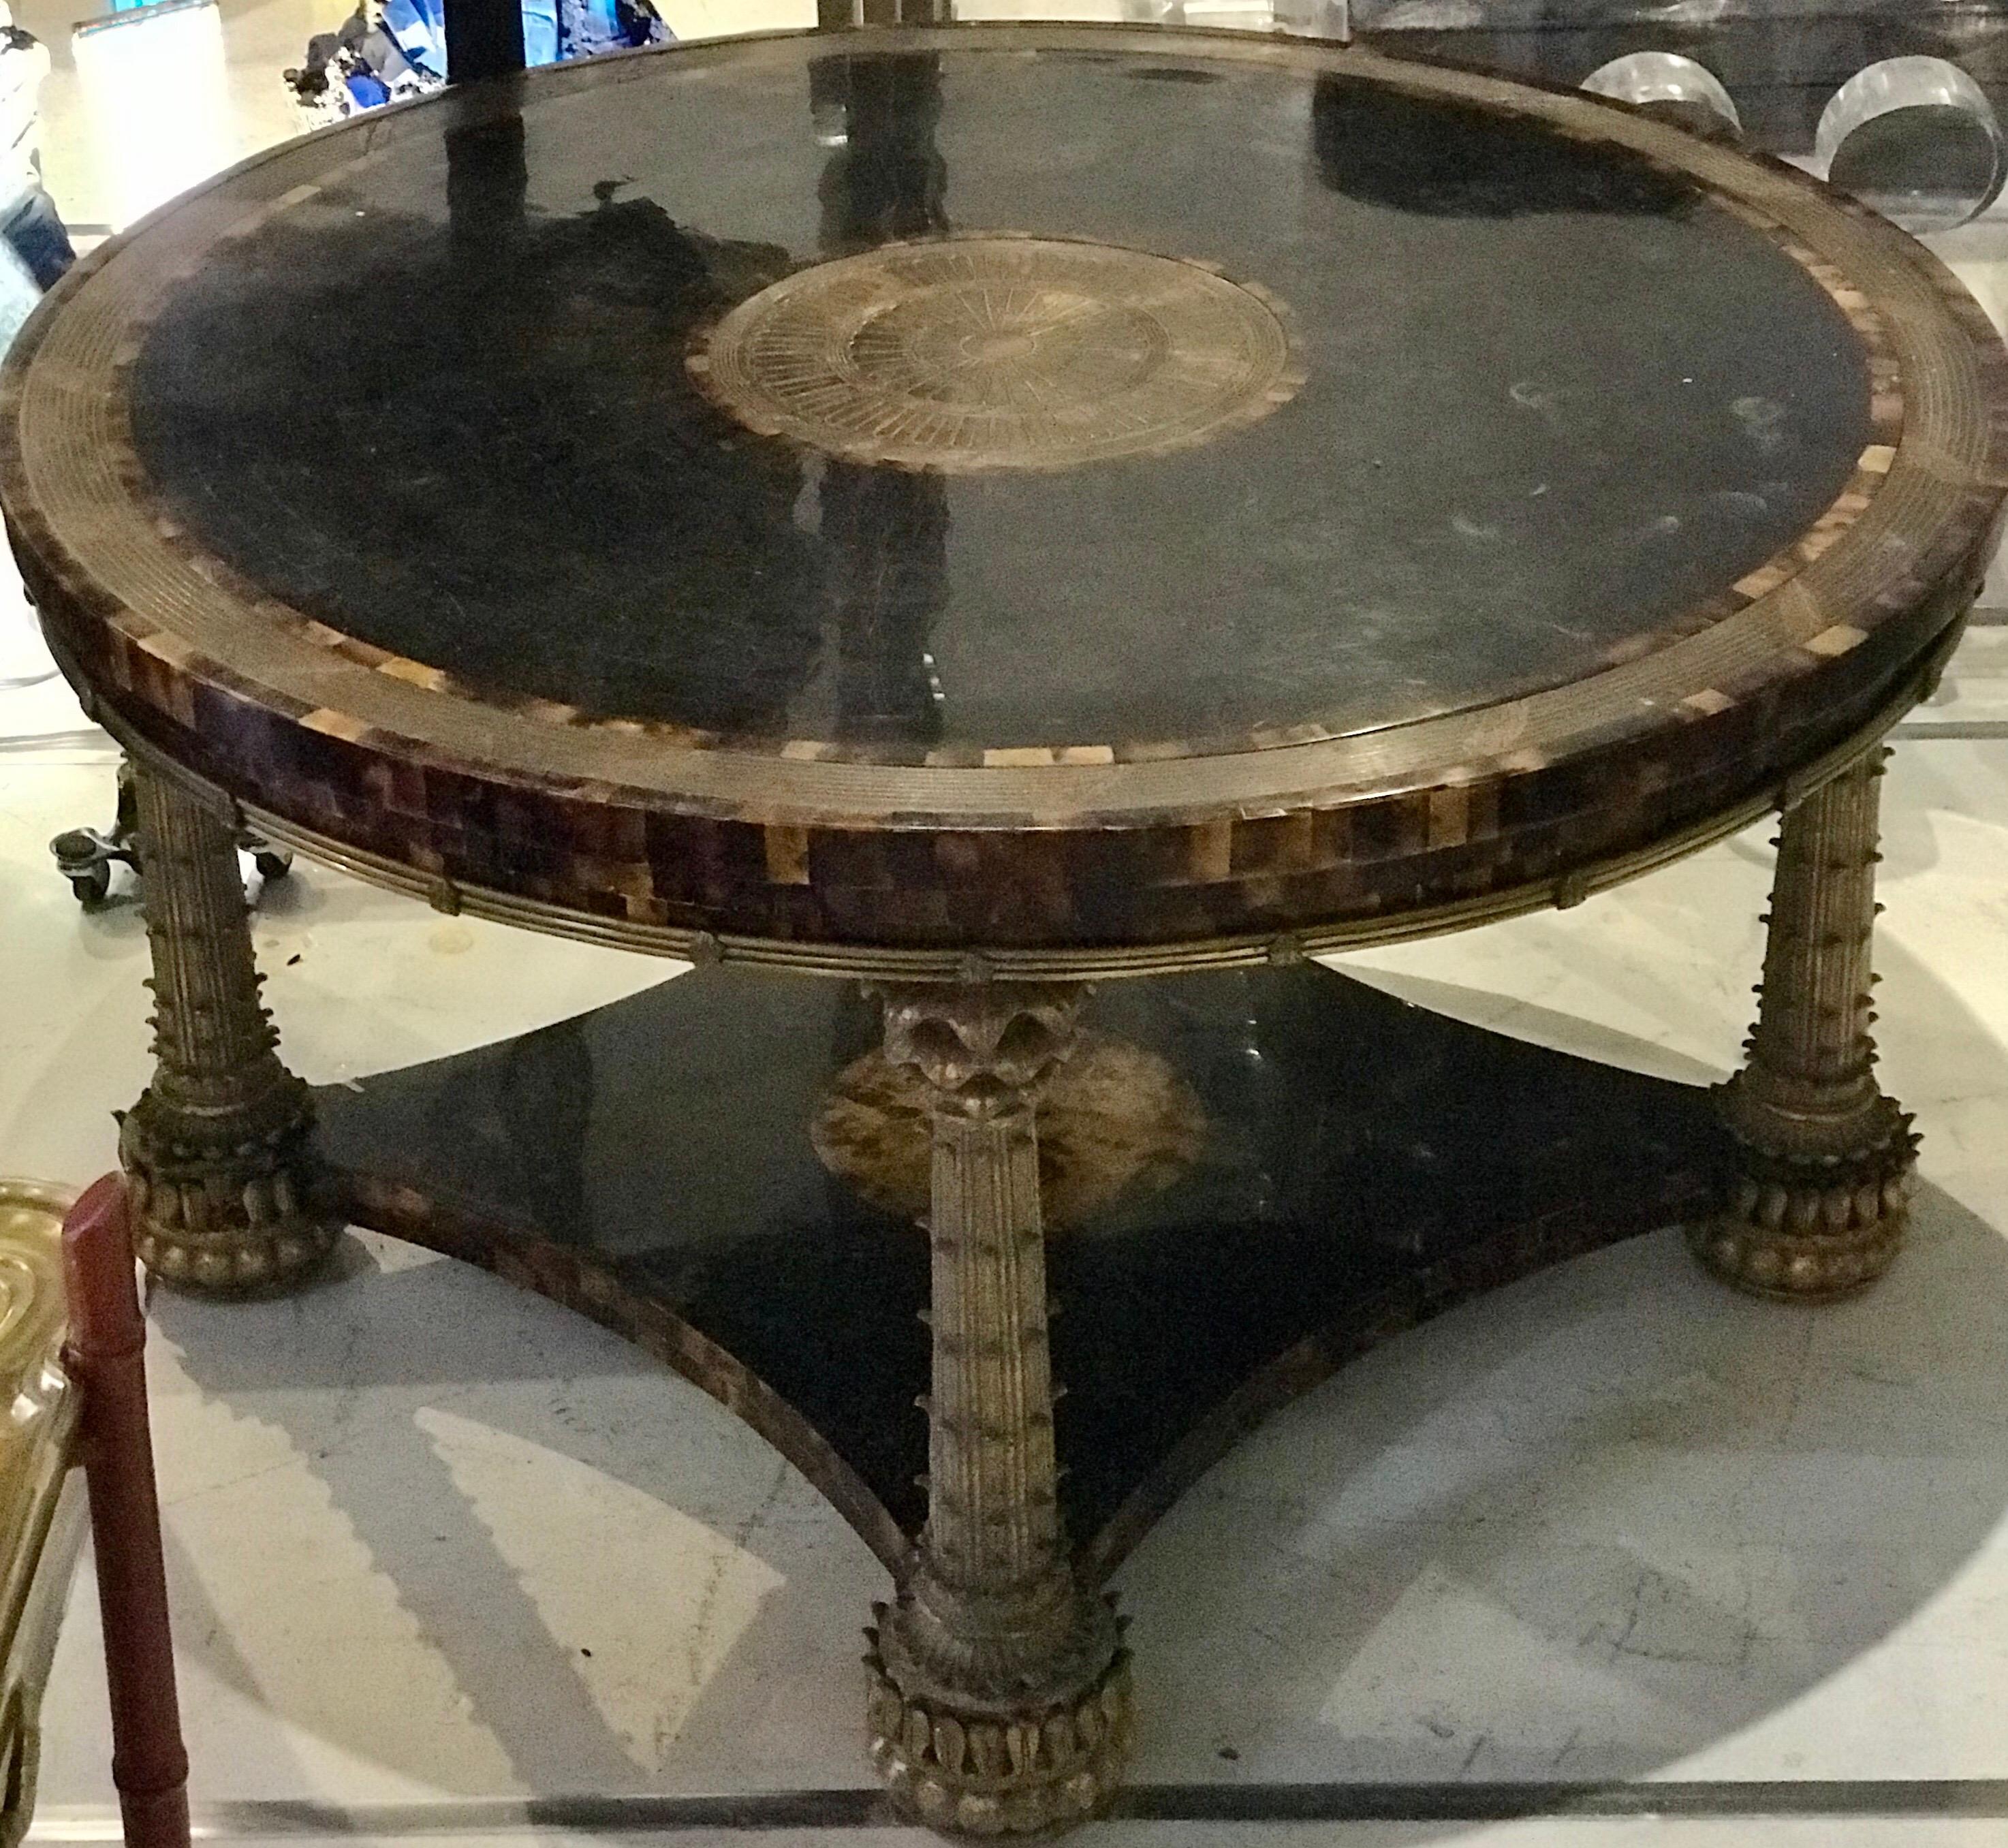 A gorgeous rare tessellated horn coffee table with beautiful bronze Palm Tree legs and center piece, by Maitland Smith.